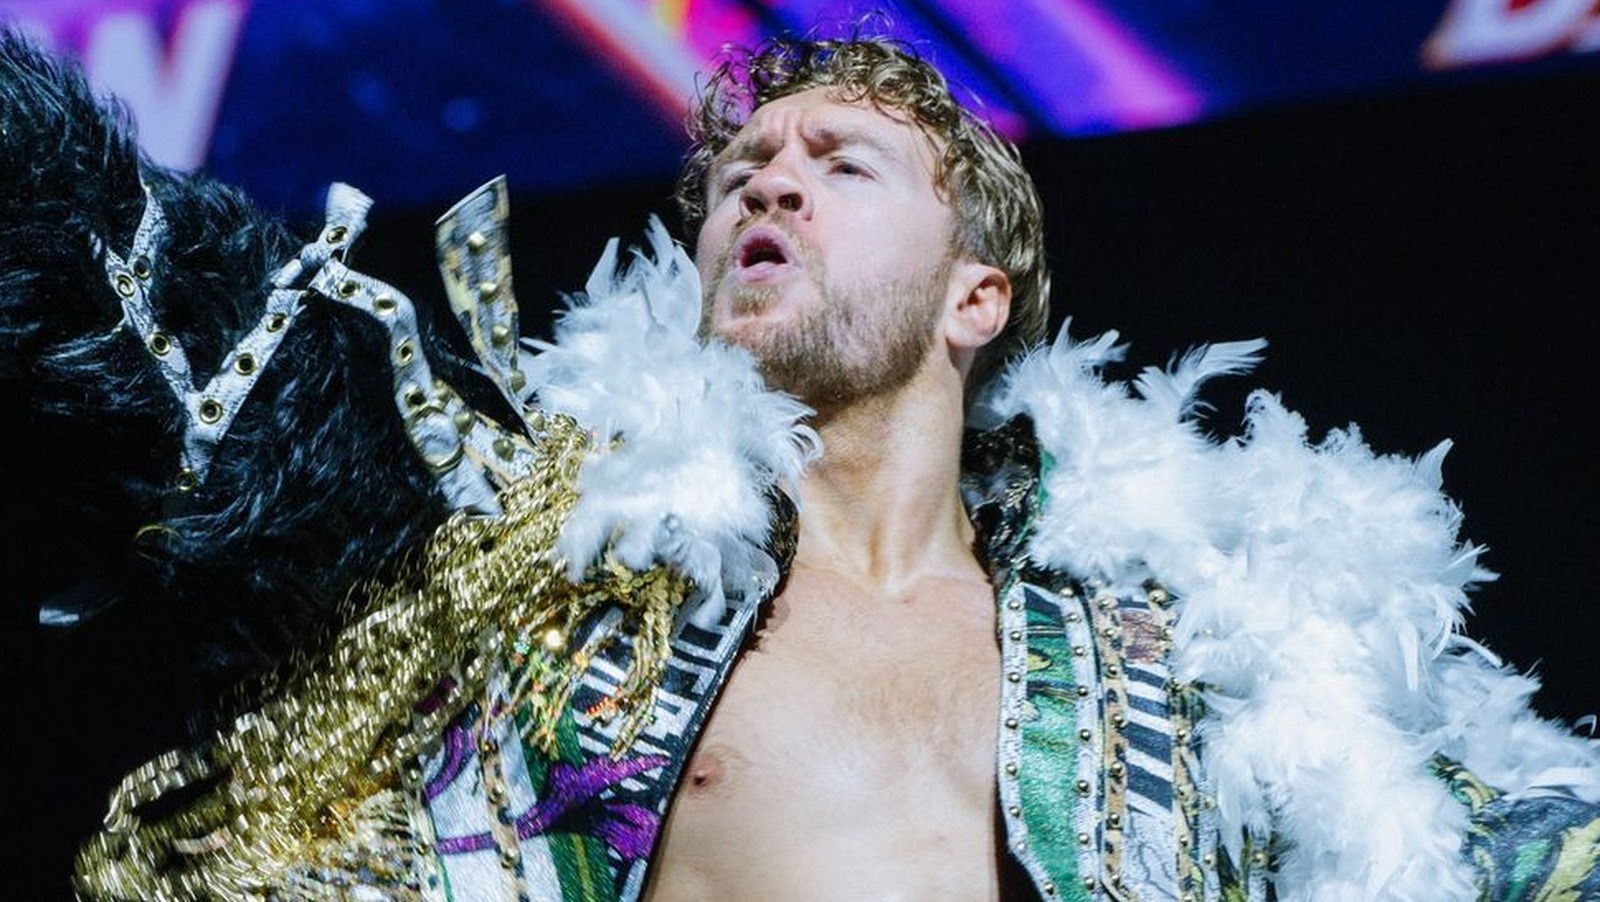 Tony Khan Responds To WWE Hall Of Famer Kevin Nash's Criticism Of AEW, Will Ospreay